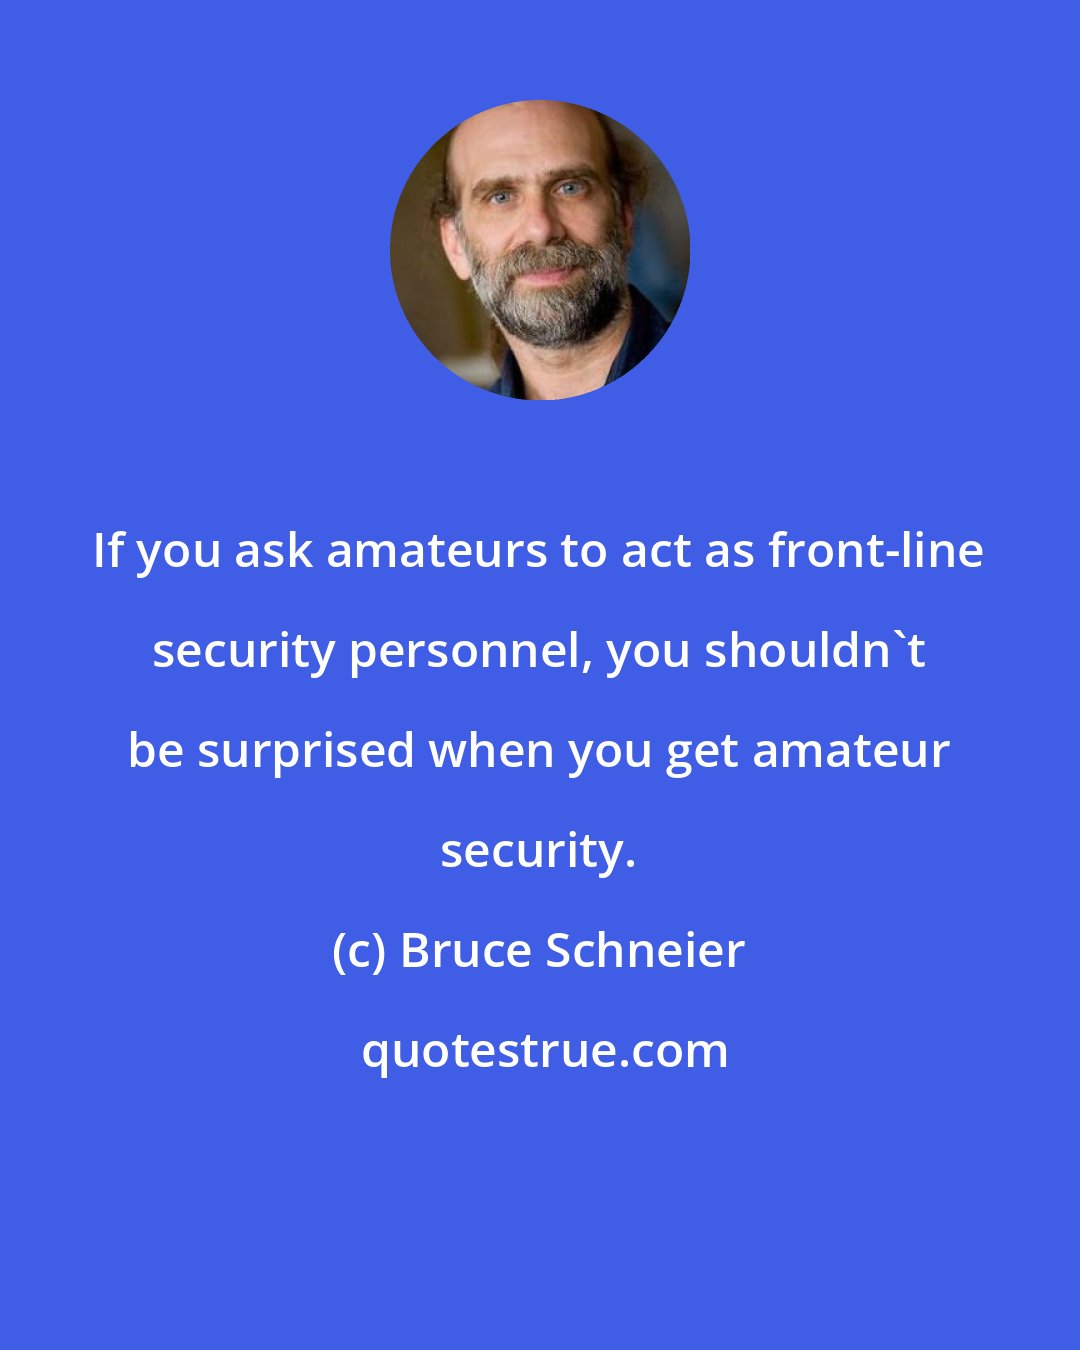 Bruce Schneier: If you ask amateurs to act as front-line security personnel, you shouldn't be surprised when you get amateur security.